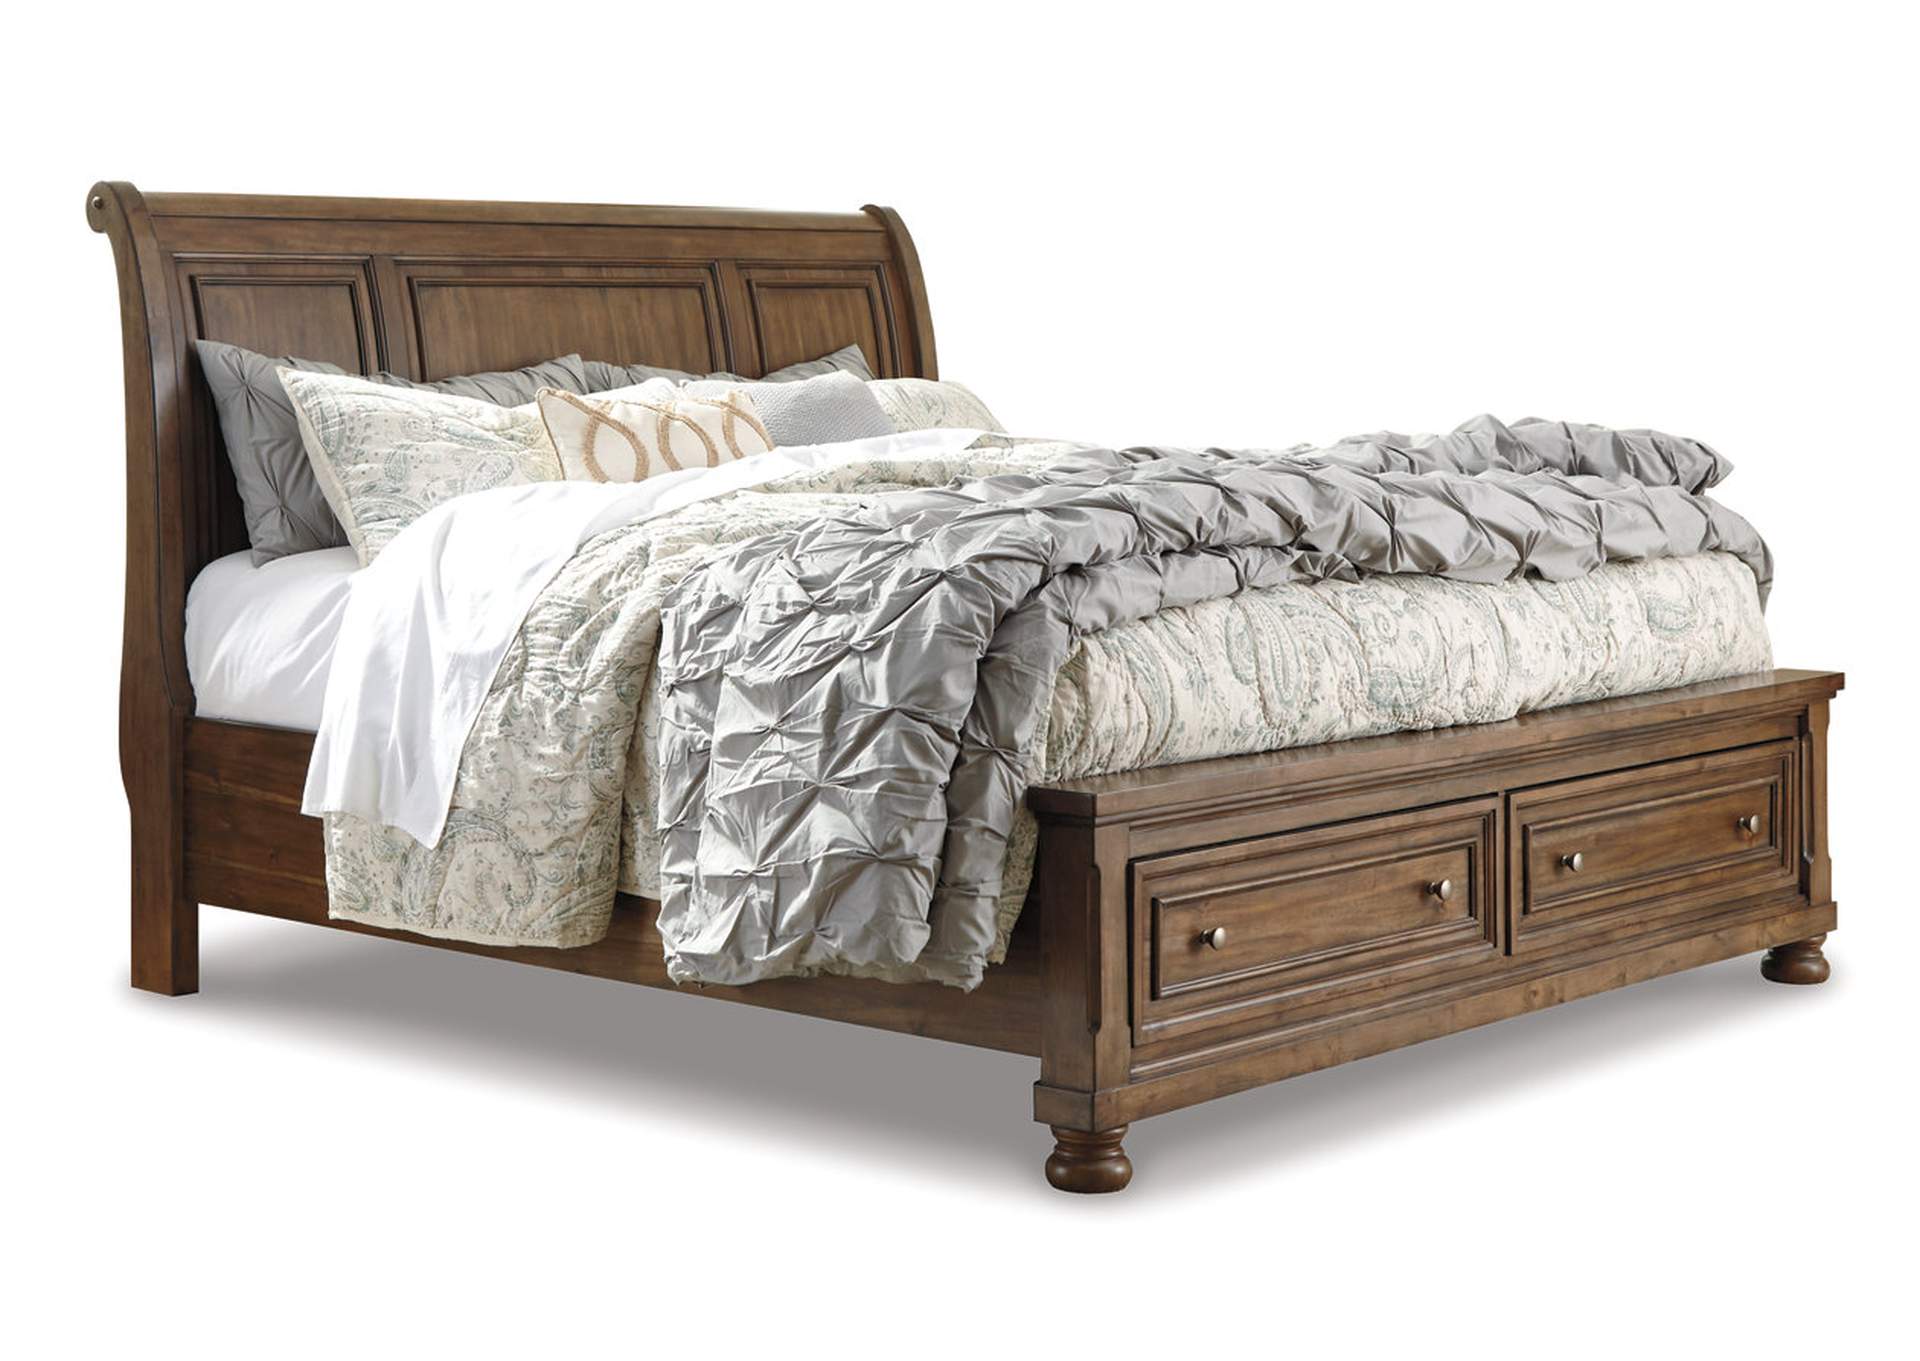 Flynnter Queen Sleigh Bed with 2 Storage Drawers,Signature Design By Ashley